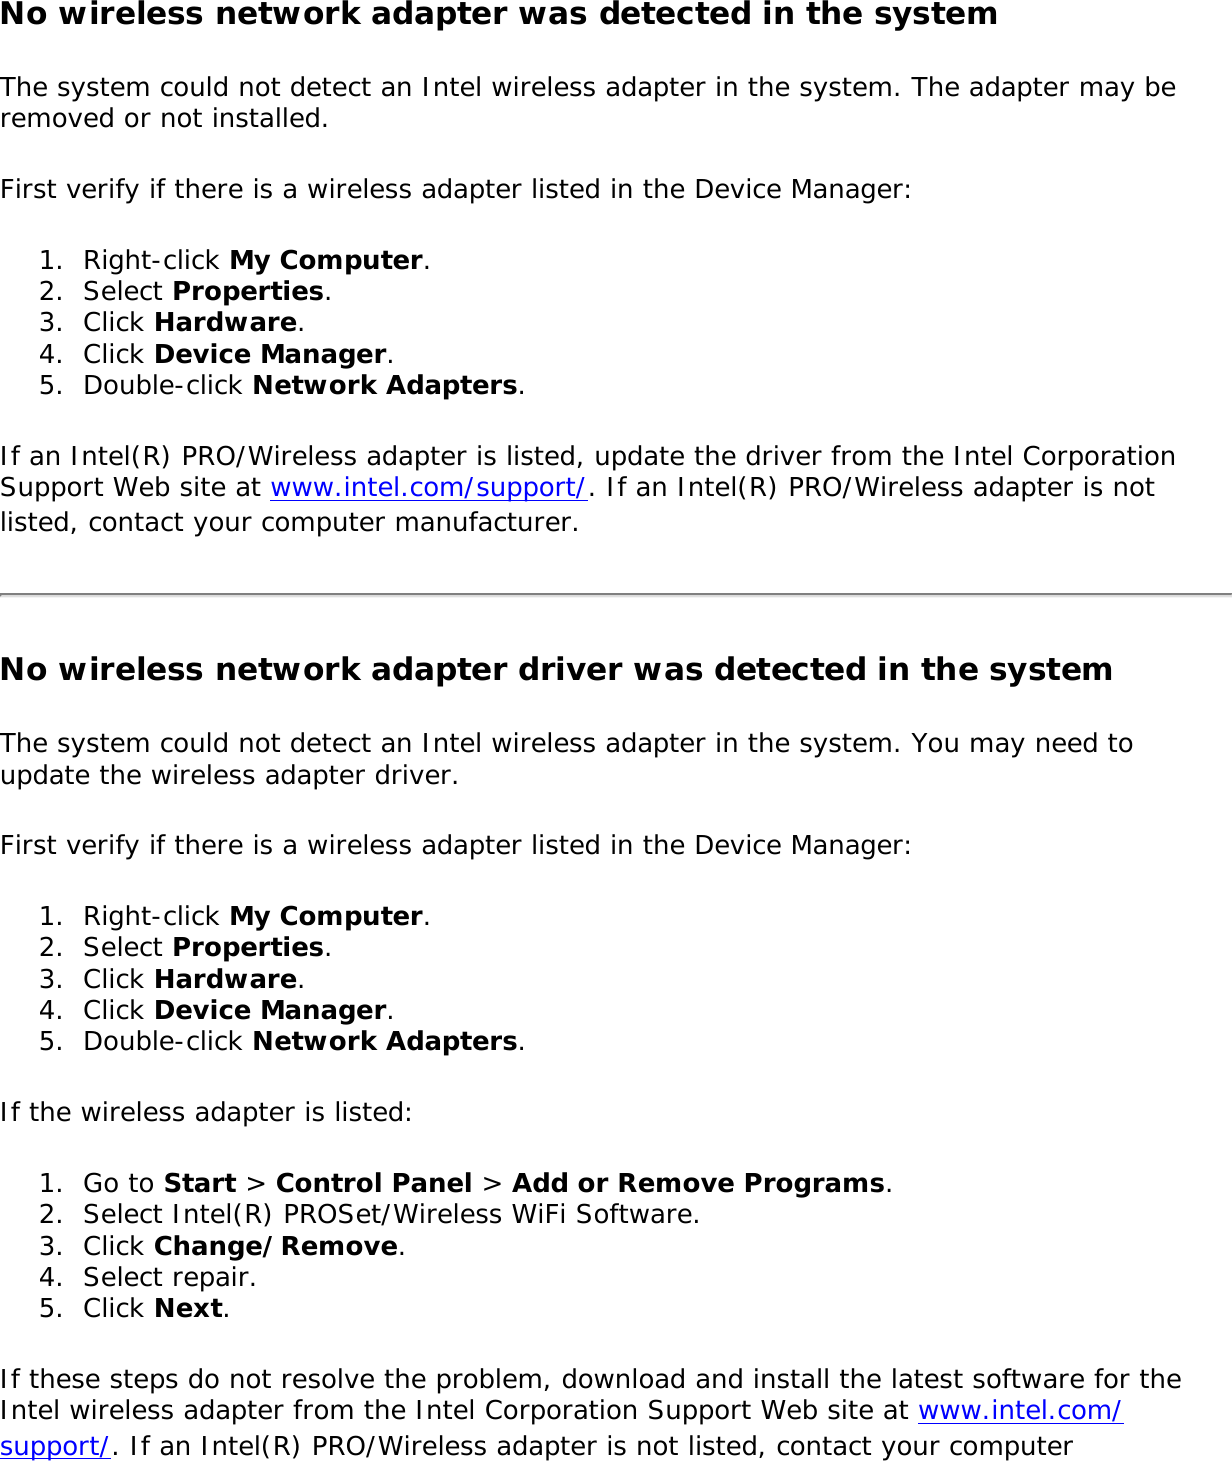 No wireless network adapter was detected in the systemThe system could not detect an Intel wireless adapter in the system. The adapter may be removed or not installed.First verify if there is a wireless adapter listed in the Device Manager:1.  Right-click My Computer.2.  Select Properties.3.  Click Hardware.4.  Click Device Manager.5.  Double-click Network Adapters.If an Intel(R) PRO/Wireless adapter is listed, update the driver from the Intel Corporation Support Web site at www.intel.com/support/. If an Intel(R) PRO/Wireless adapter is not listed, contact your computer manufacturer.No wireless network adapter driver was detected in the systemThe system could not detect an Intel wireless adapter in the system. You may need to update the wireless adapter driver. First verify if there is a wireless adapter listed in the Device Manager:1.  Right-click My Computer.2.  Select Properties.3.  Click Hardware.4.  Click Device Manager.5.  Double-click Network Adapters.If the wireless adapter is listed: 1.  Go to Start &gt; Control Panel &gt; Add or Remove Programs.2.  Select Intel(R) PROSet/Wireless WiFi Software.3.  Click Change/Remove.4.  Select repair.5.  Click Next.If these steps do not resolve the problem, download and install the latest software for the Intel wireless adapter from the Intel Corporation Support Web site at www.intel.com/support/. If an Intel(R) PRO/Wireless adapter is not listed, contact your computer 